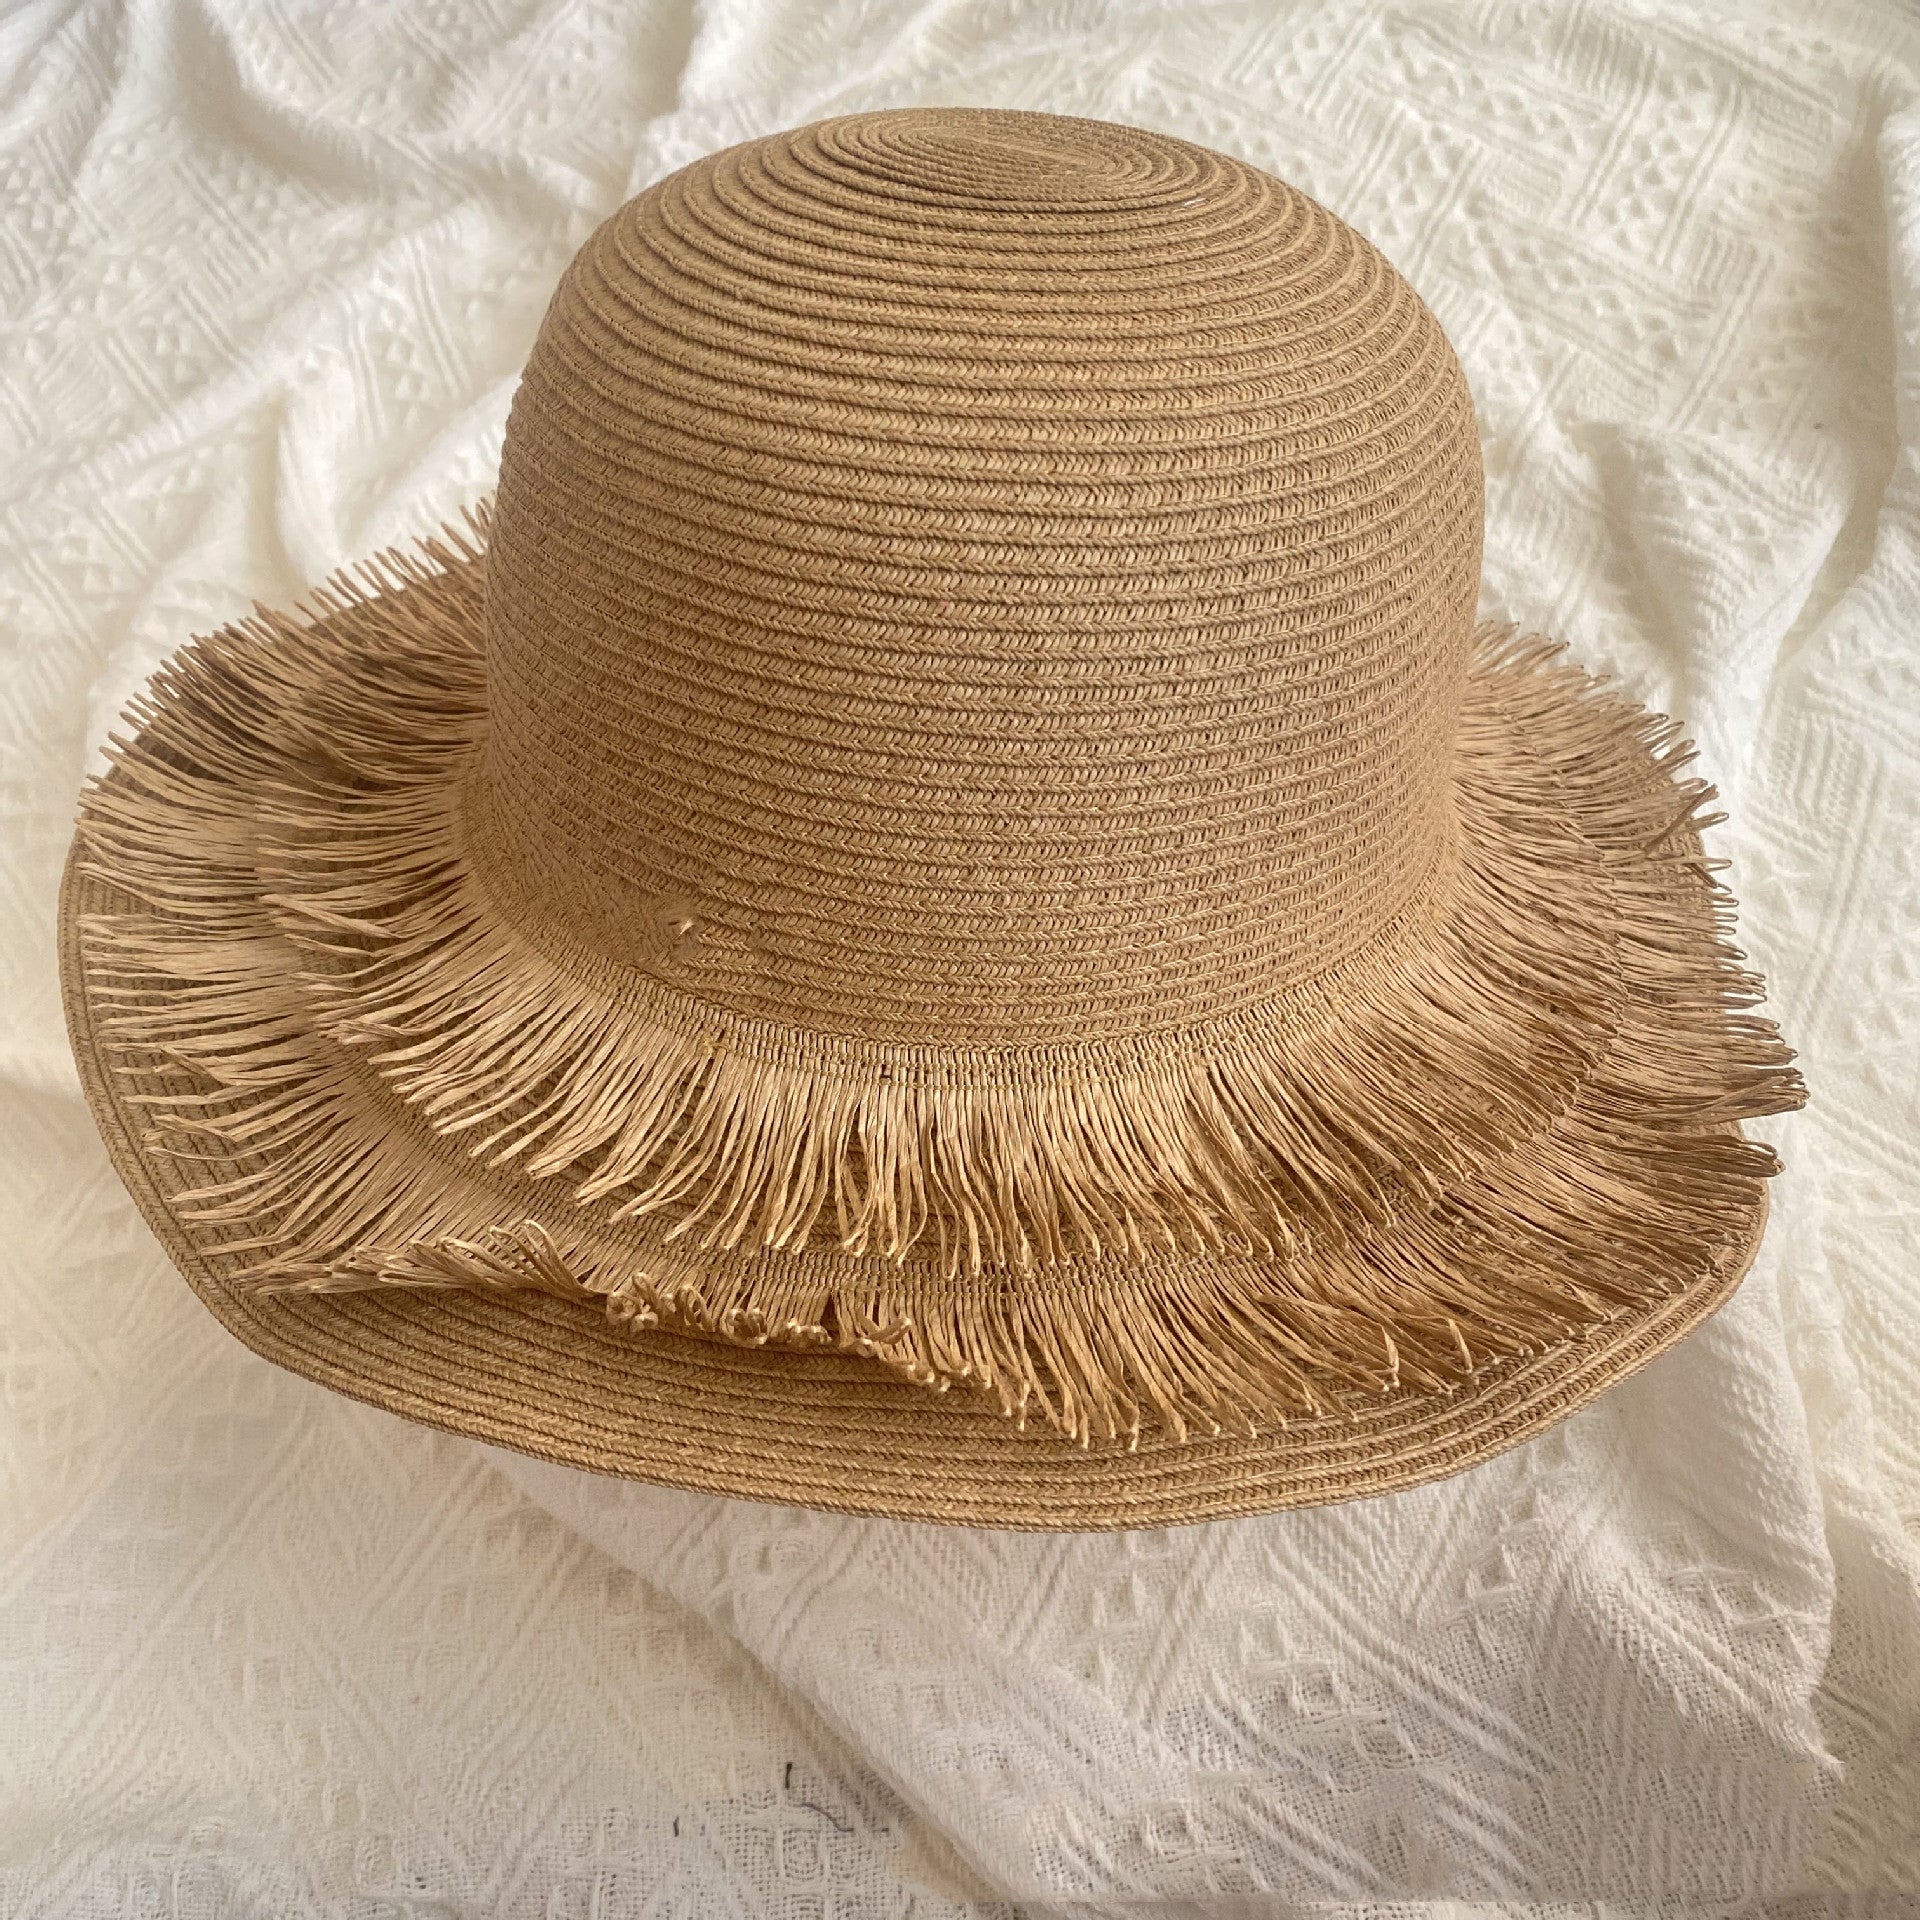 A Fringed Designed Seaside Beach Straw Hat by Beachy Cover Ups, perfect for sun protection, with fringes for added finesse.